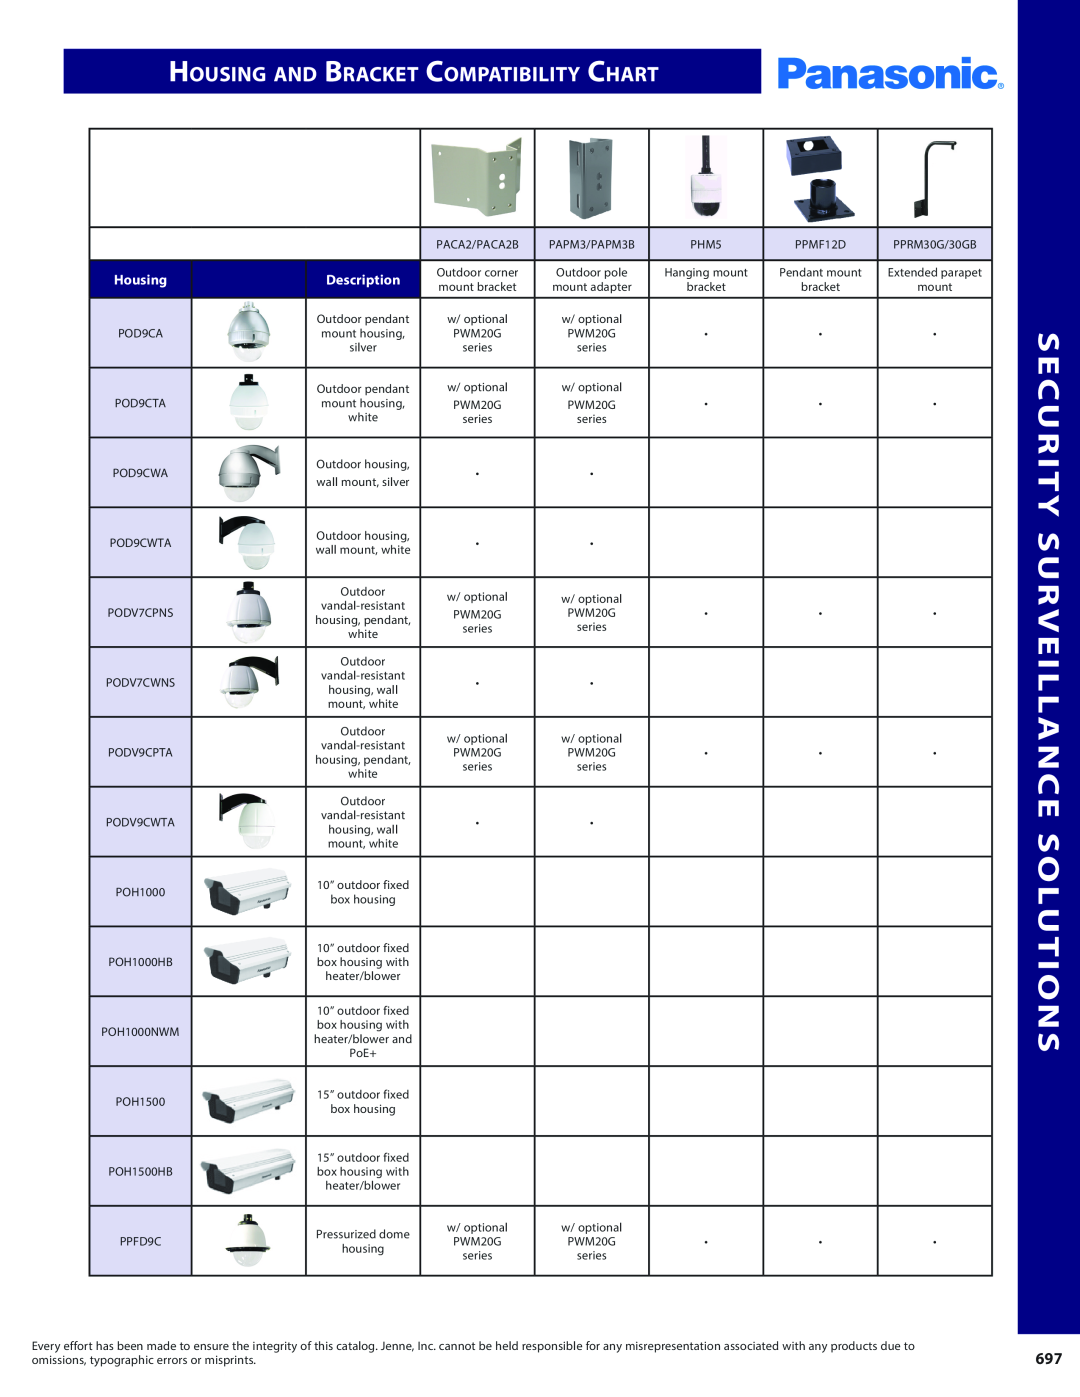 Panasonic PMPU2000 manual Security Surveillance Solutions, Housing and Bracket Compatibility Chart 